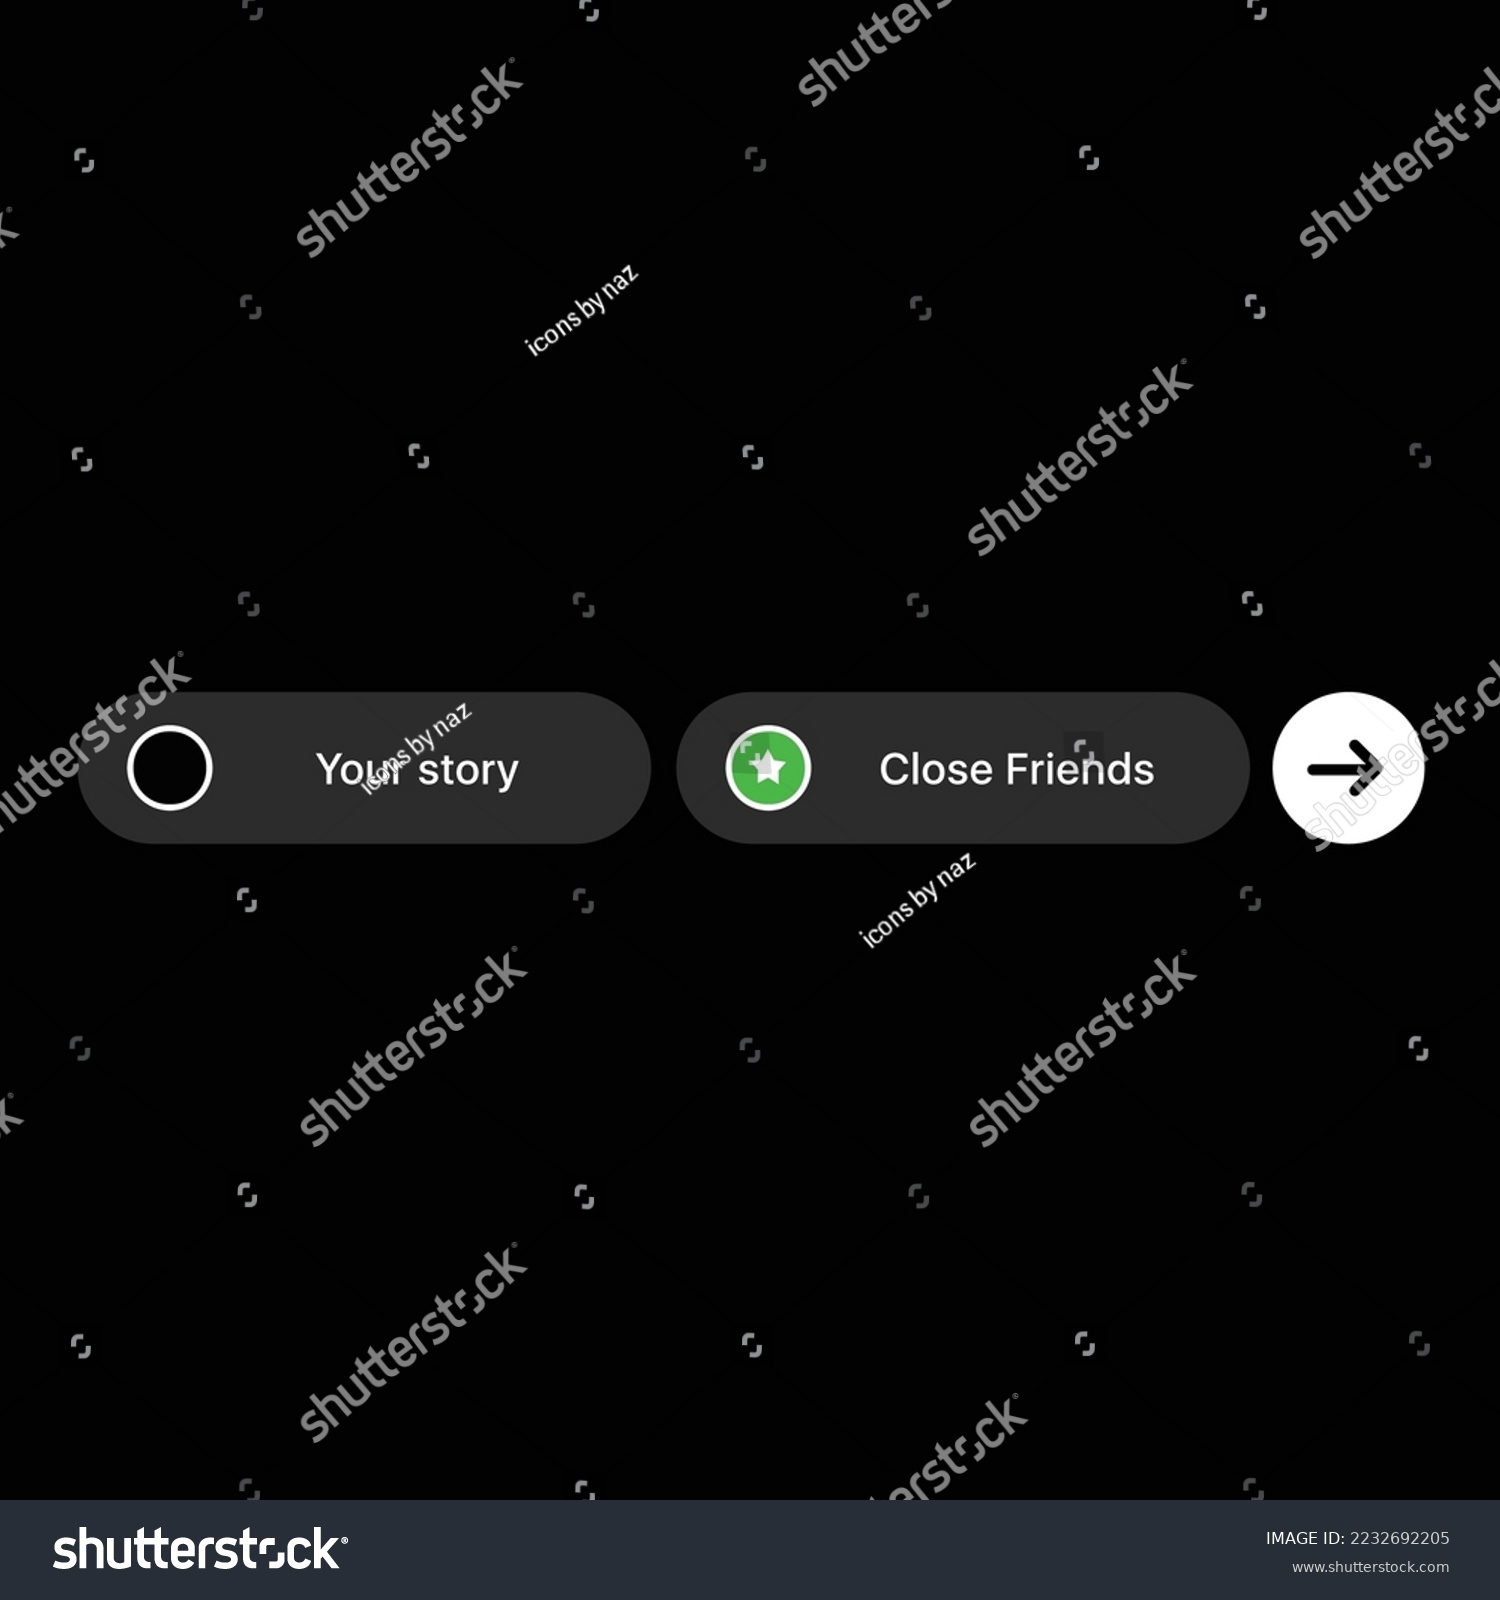 social media Instagram stories icons and buttons. close friends button, adding, sending, and sharing stickers. dark mode flat vector symbols. #2232692205